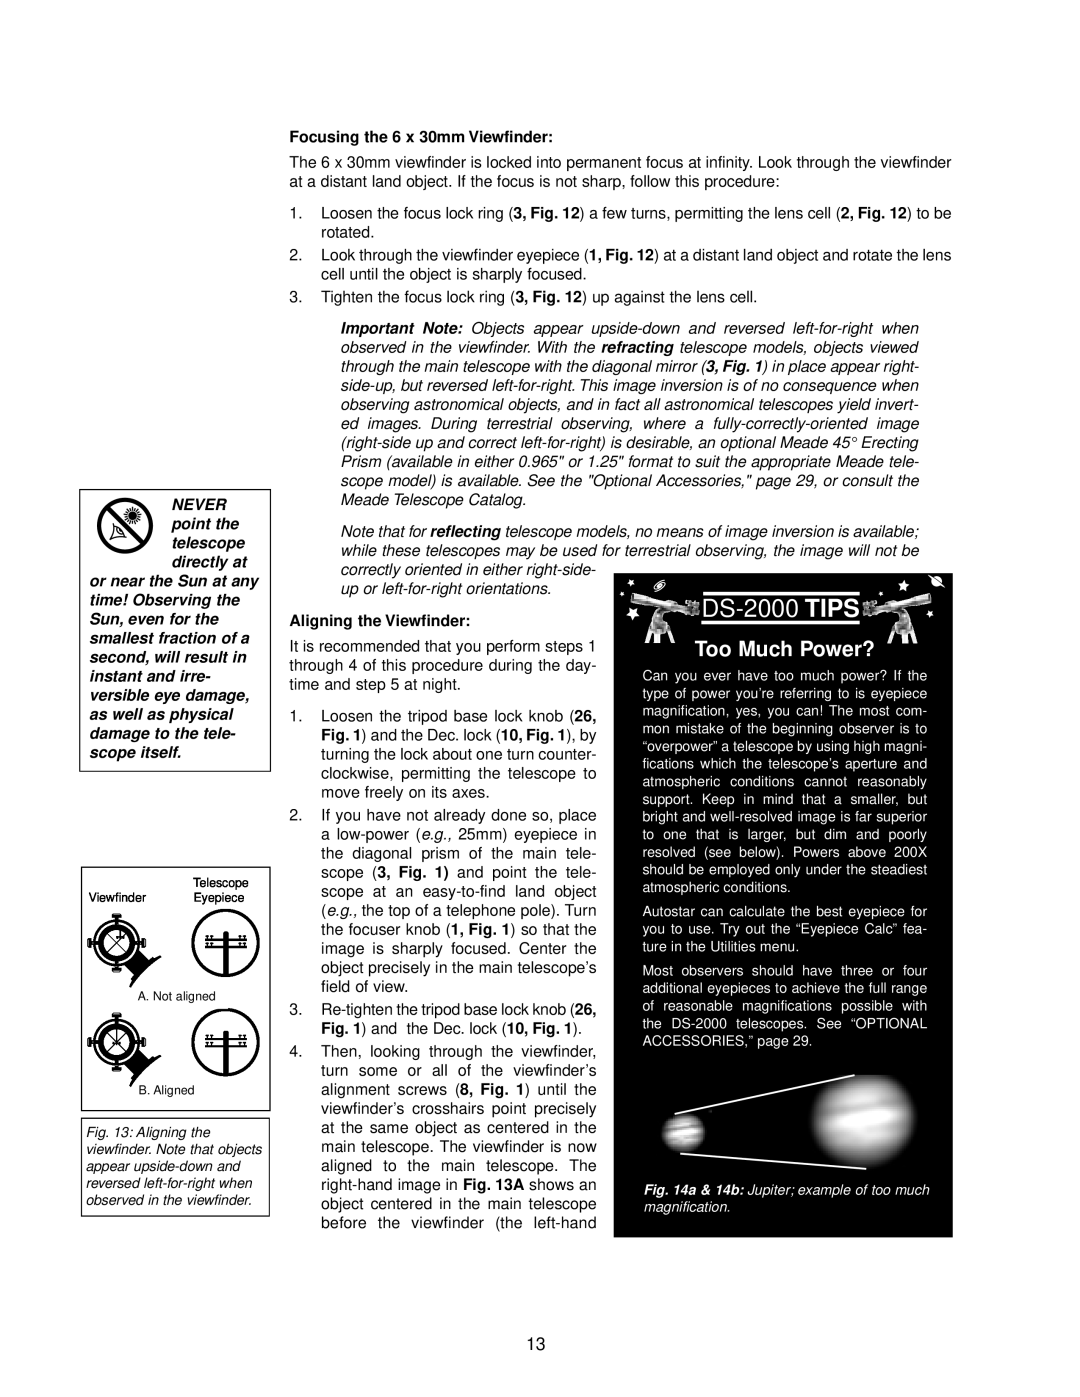 Meade instruction manual DS-2000 TIPS, Too Much Power?, NEVER point the telescope directly at or near the Sun at any 